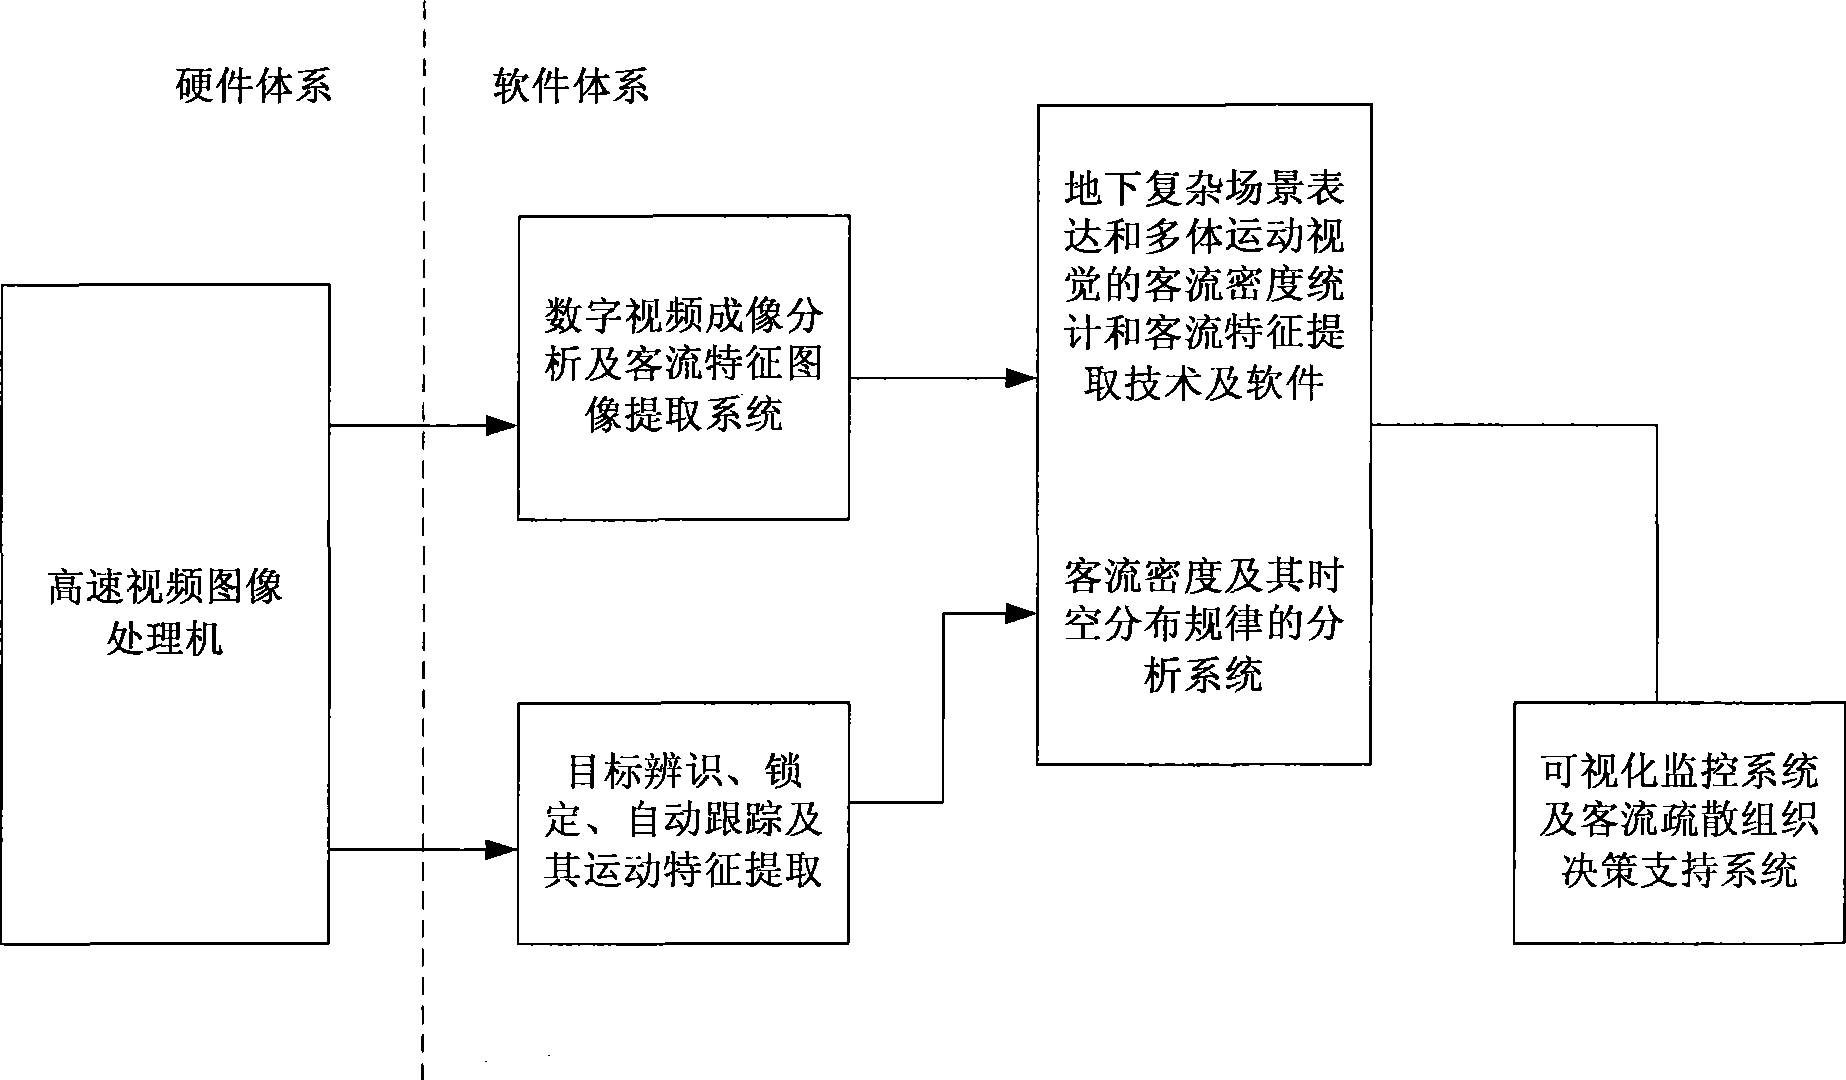 System of urban track traffic for passenger flow monitor and emergency evacuation